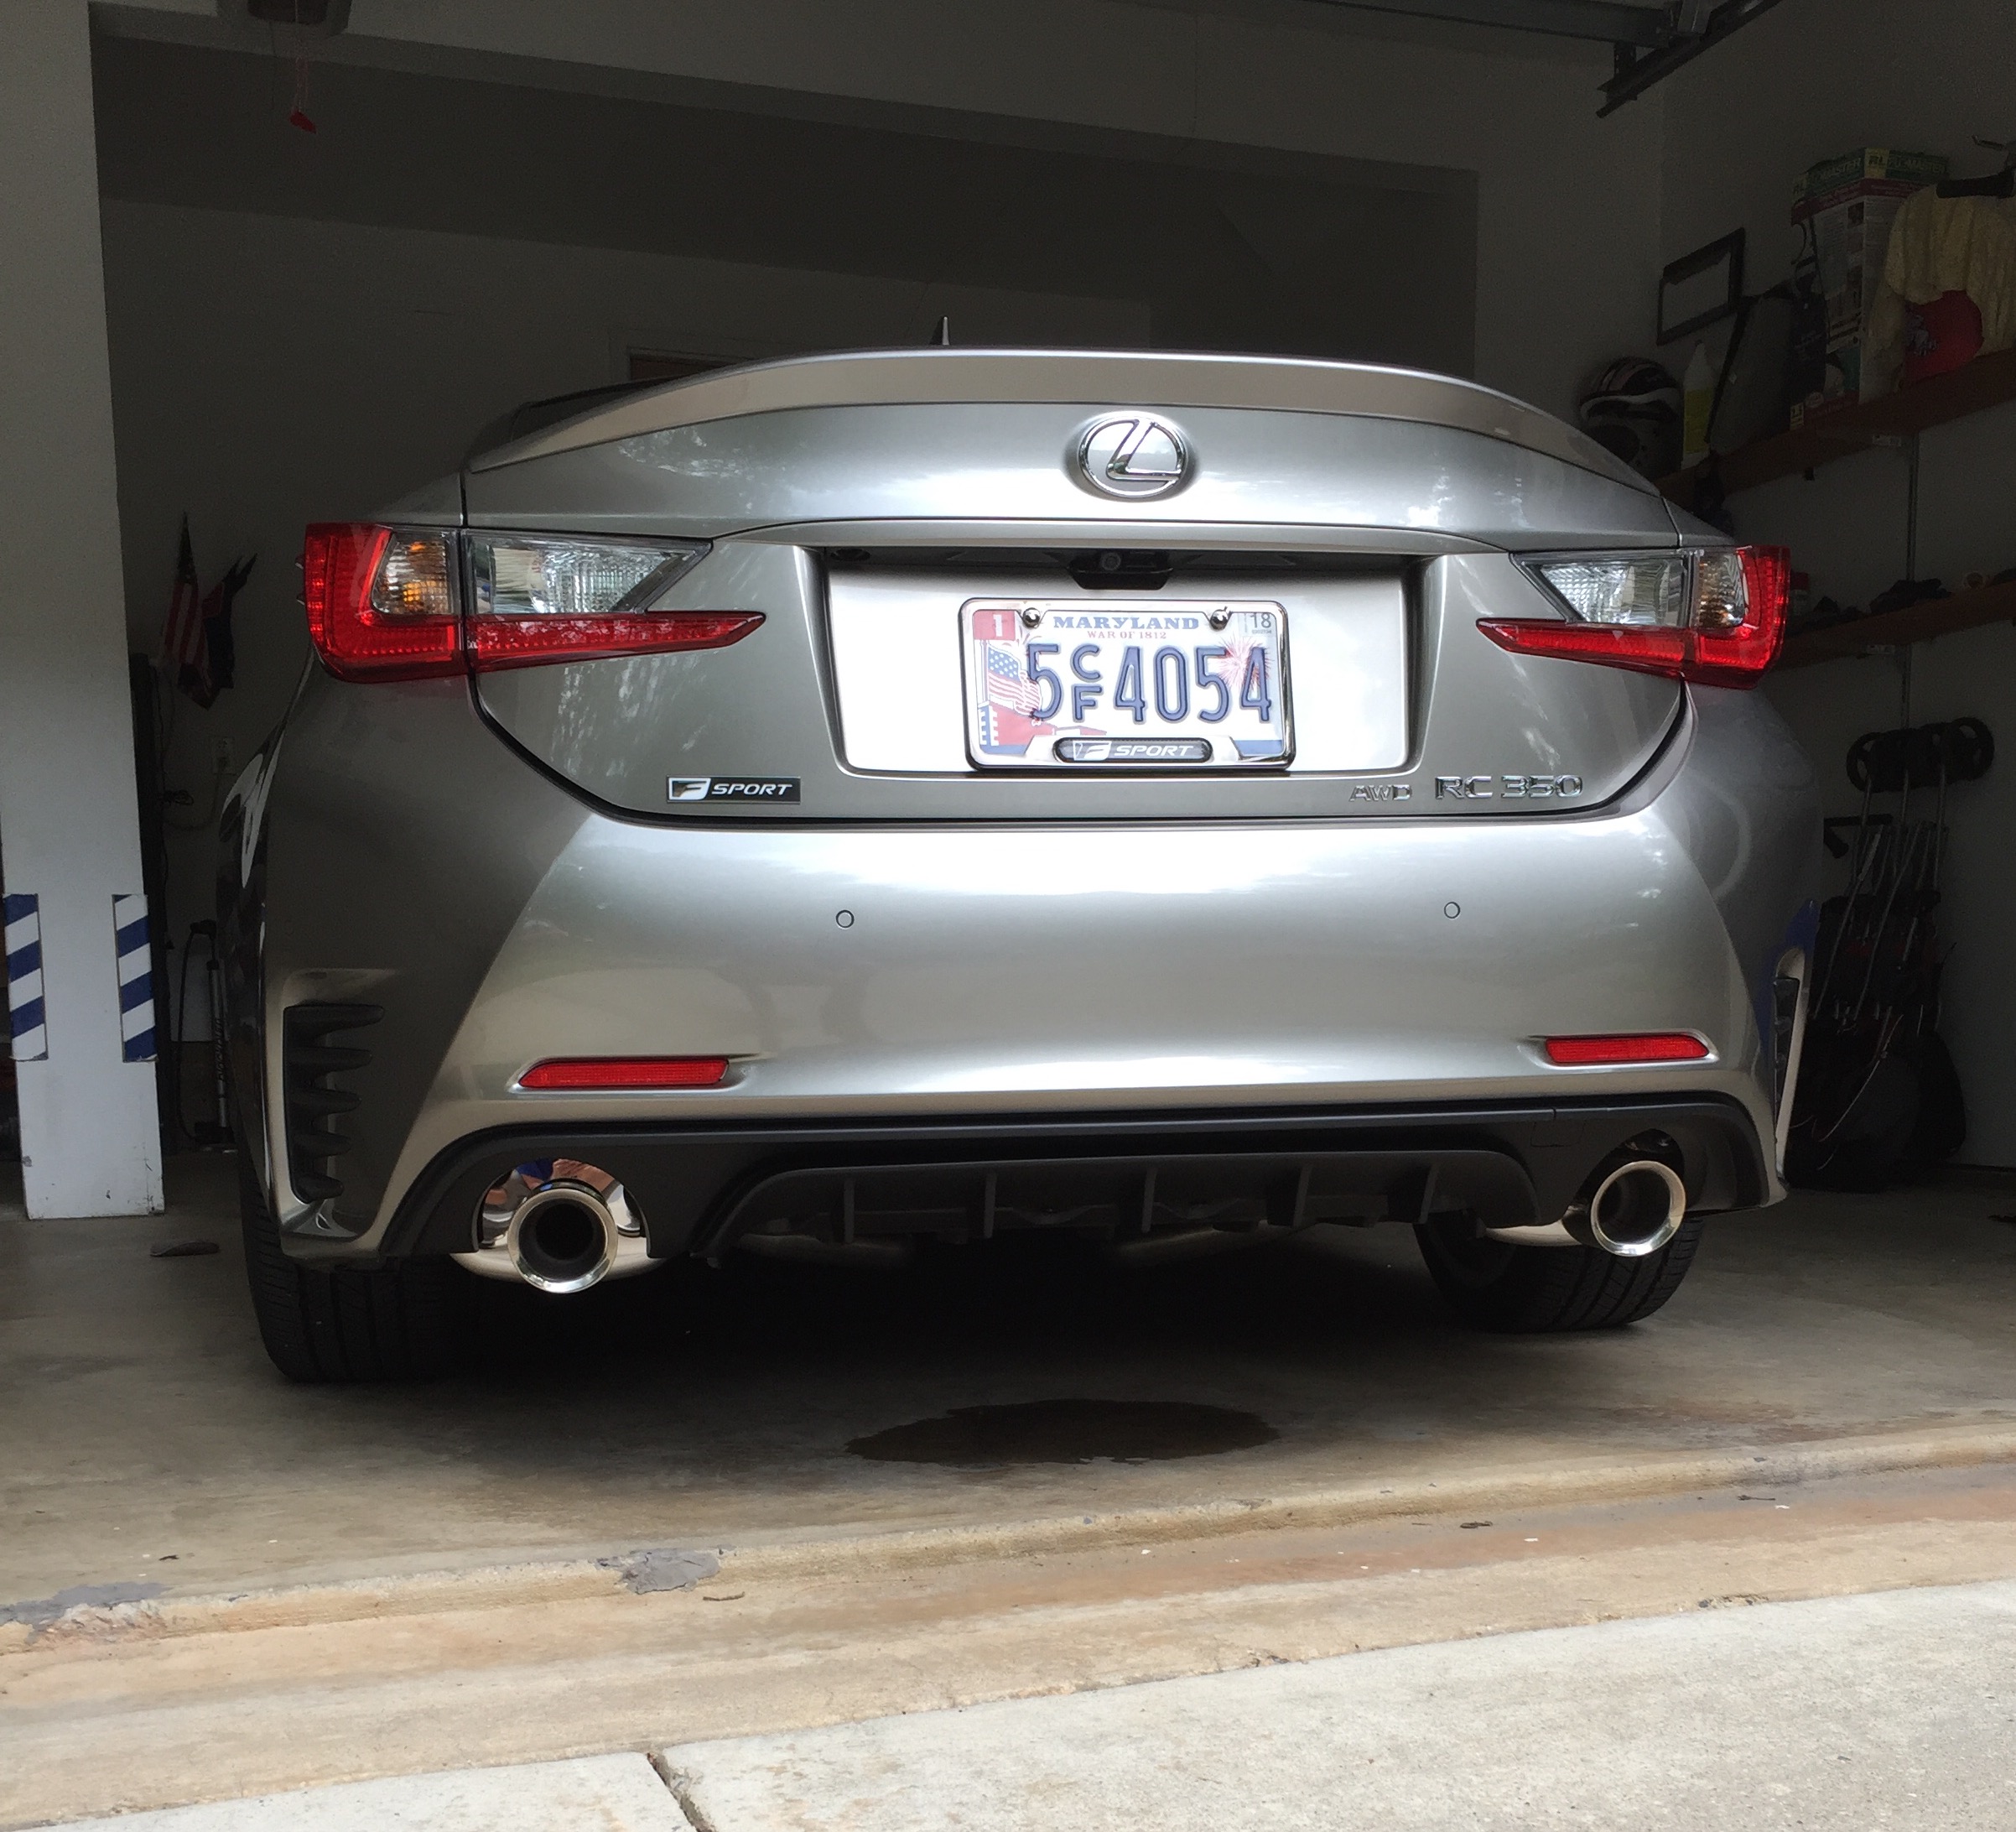 RC 350 F-Sport - Exhaust System upgrade? - Lexus RC Owners Club / RC